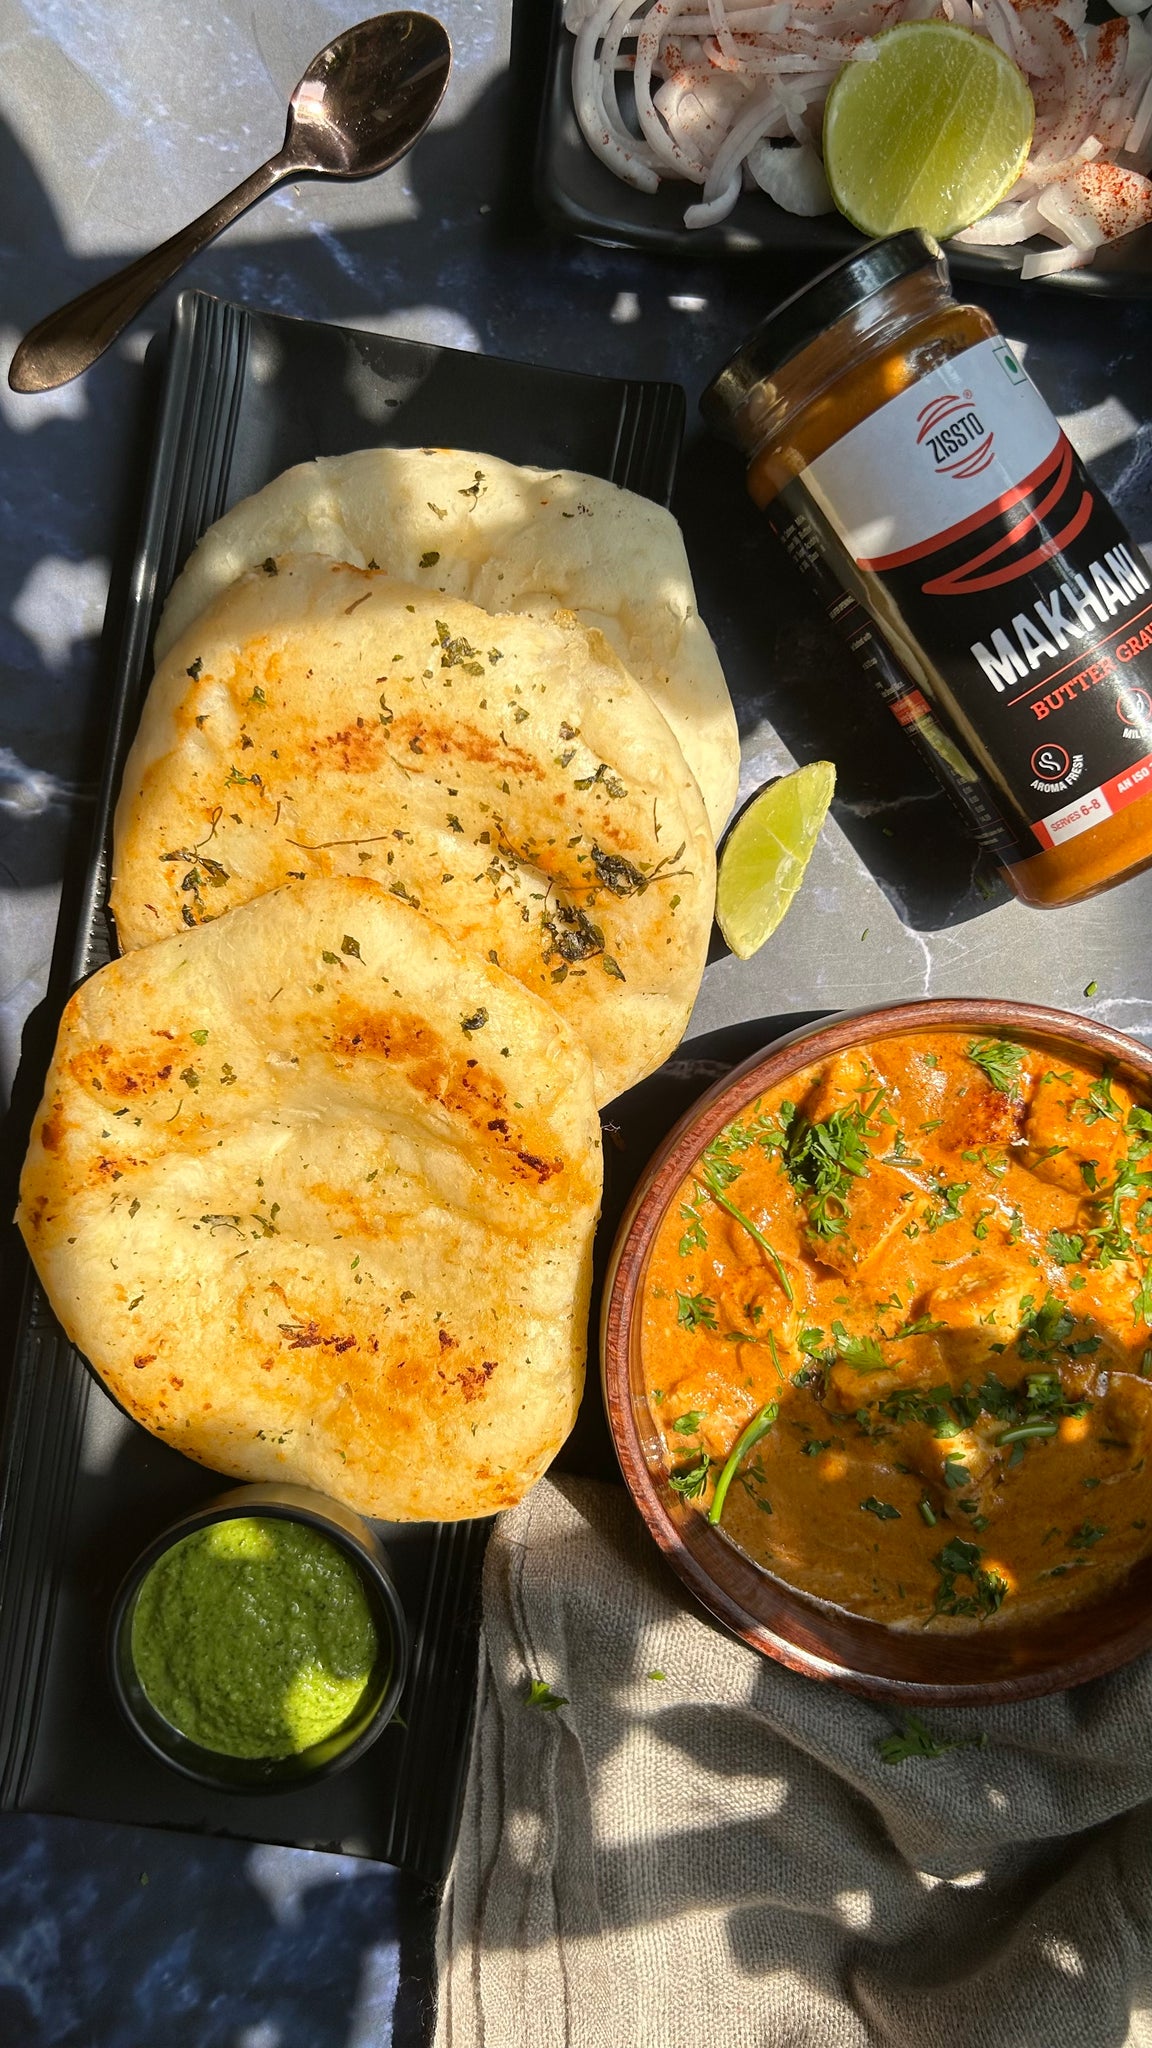 Zissto-licious Panner Makhani: A Paneer Party in 3 Easy Steps!